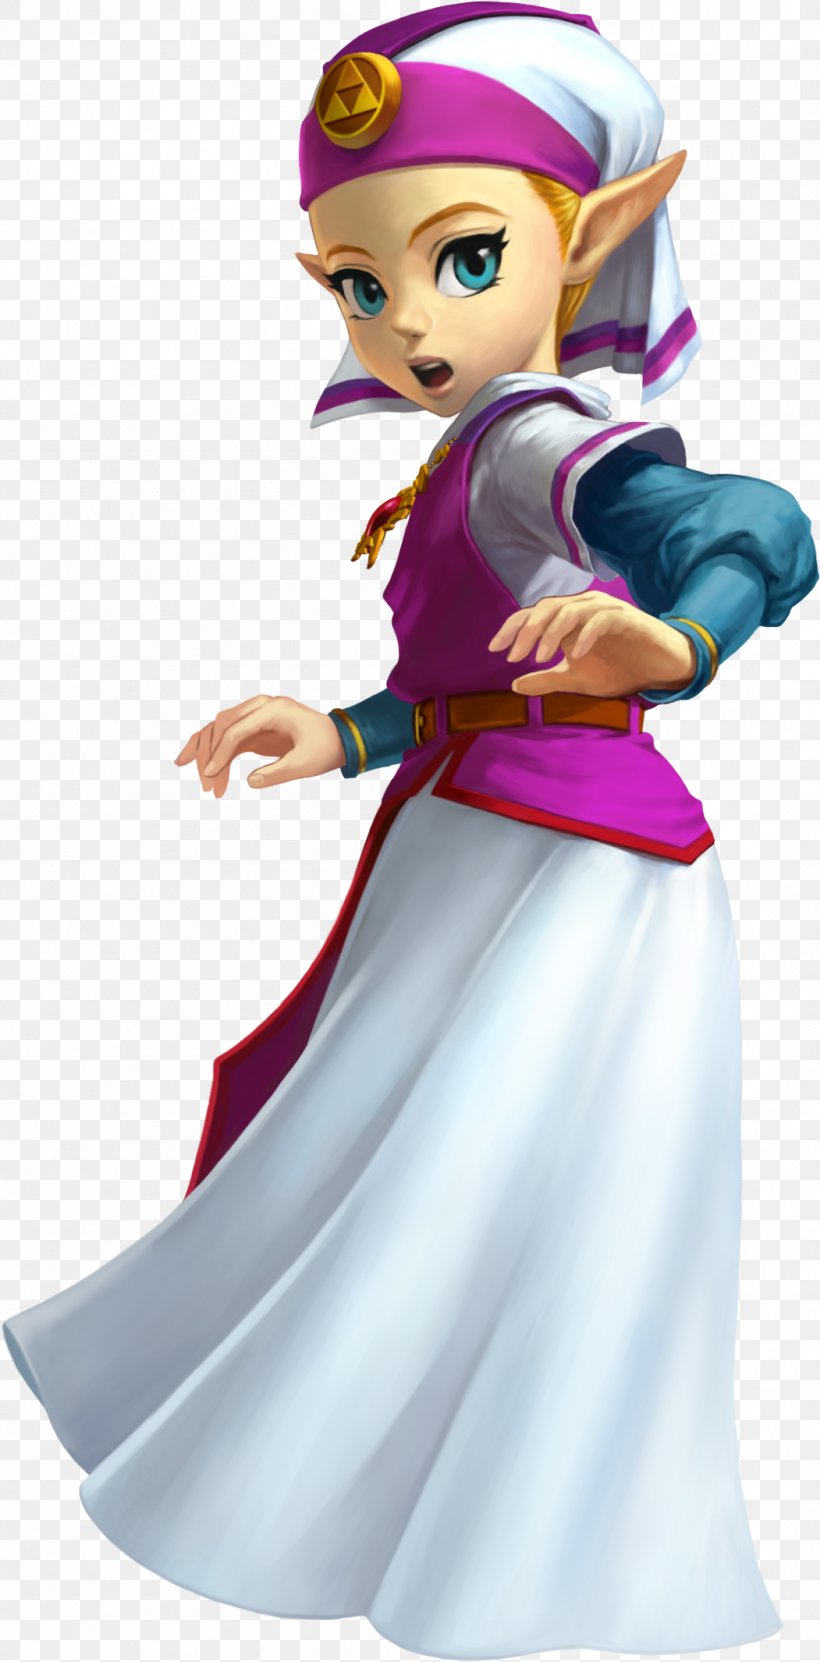 The Legend Of Zelda: Ocarina Of Time 3D The Legend Of Zelda: Twilight Princess HD The Legend Of Zelda: Skyward Sword The Legend Of Zelda: Breath Of The Wild, PNG, 1051x2131px, Legend Of Zelda Ocarina Of Time, Cartoon, Character, Costume Design, Fictional Character Download Free